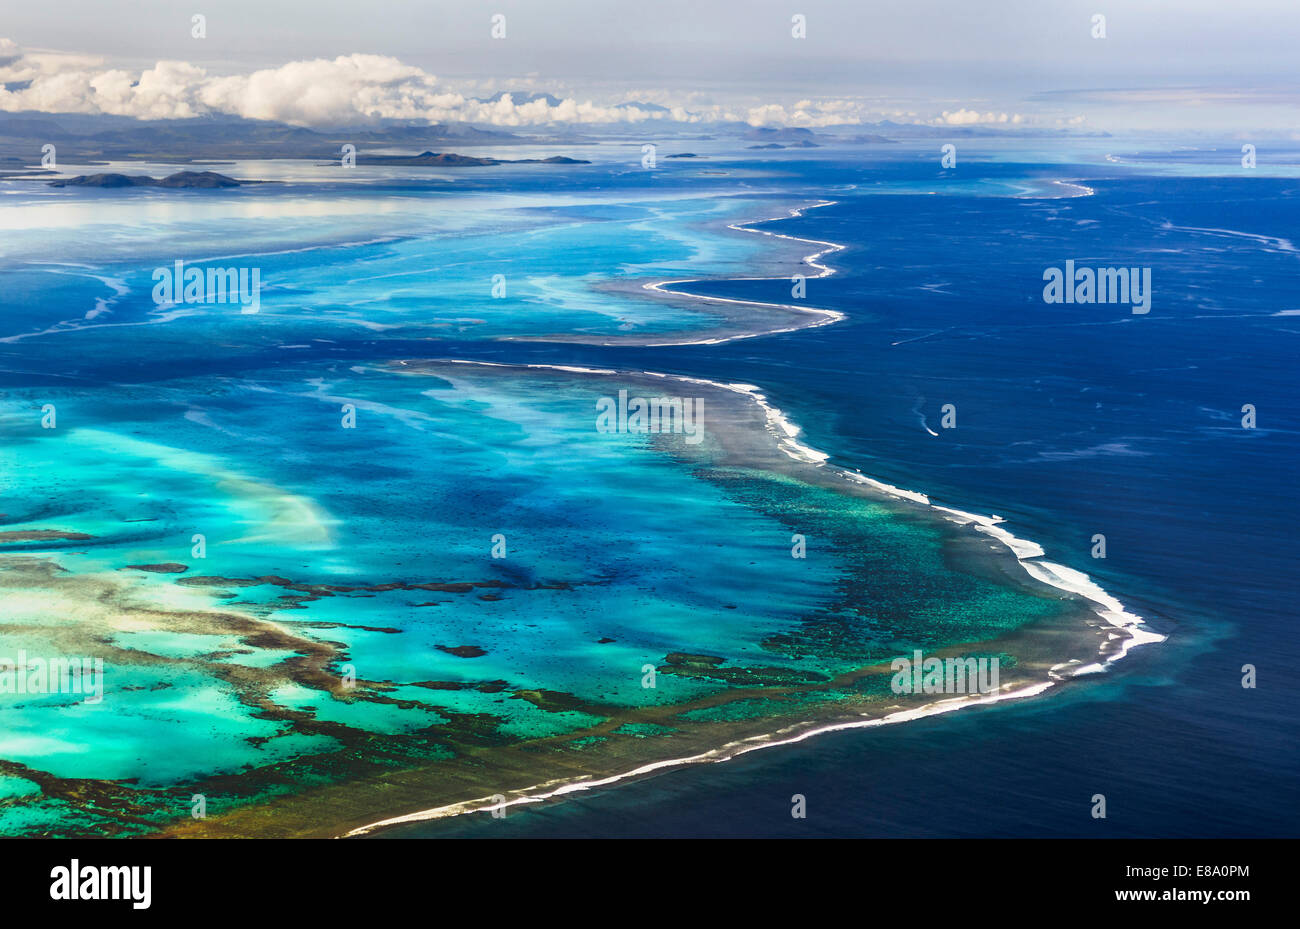 Barrier of the coral reef of Grande Terre, New Caledonia Stock Photo